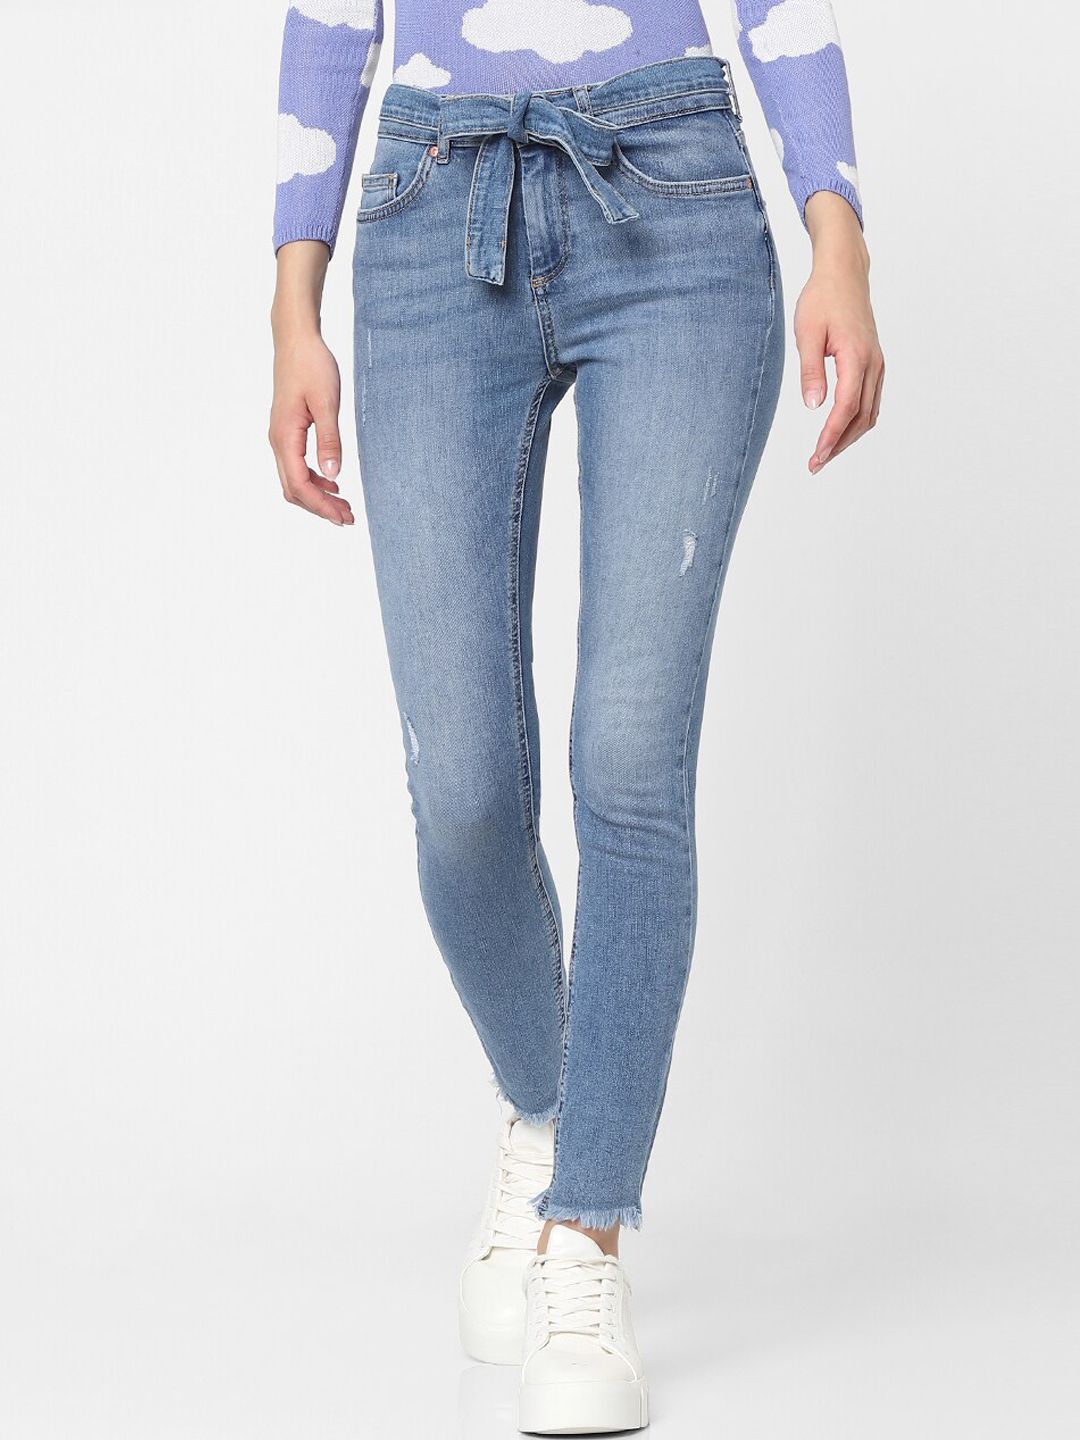 ONLY Women Blue High-Rise Mildly Distressed Light Fade Jeans Price in India